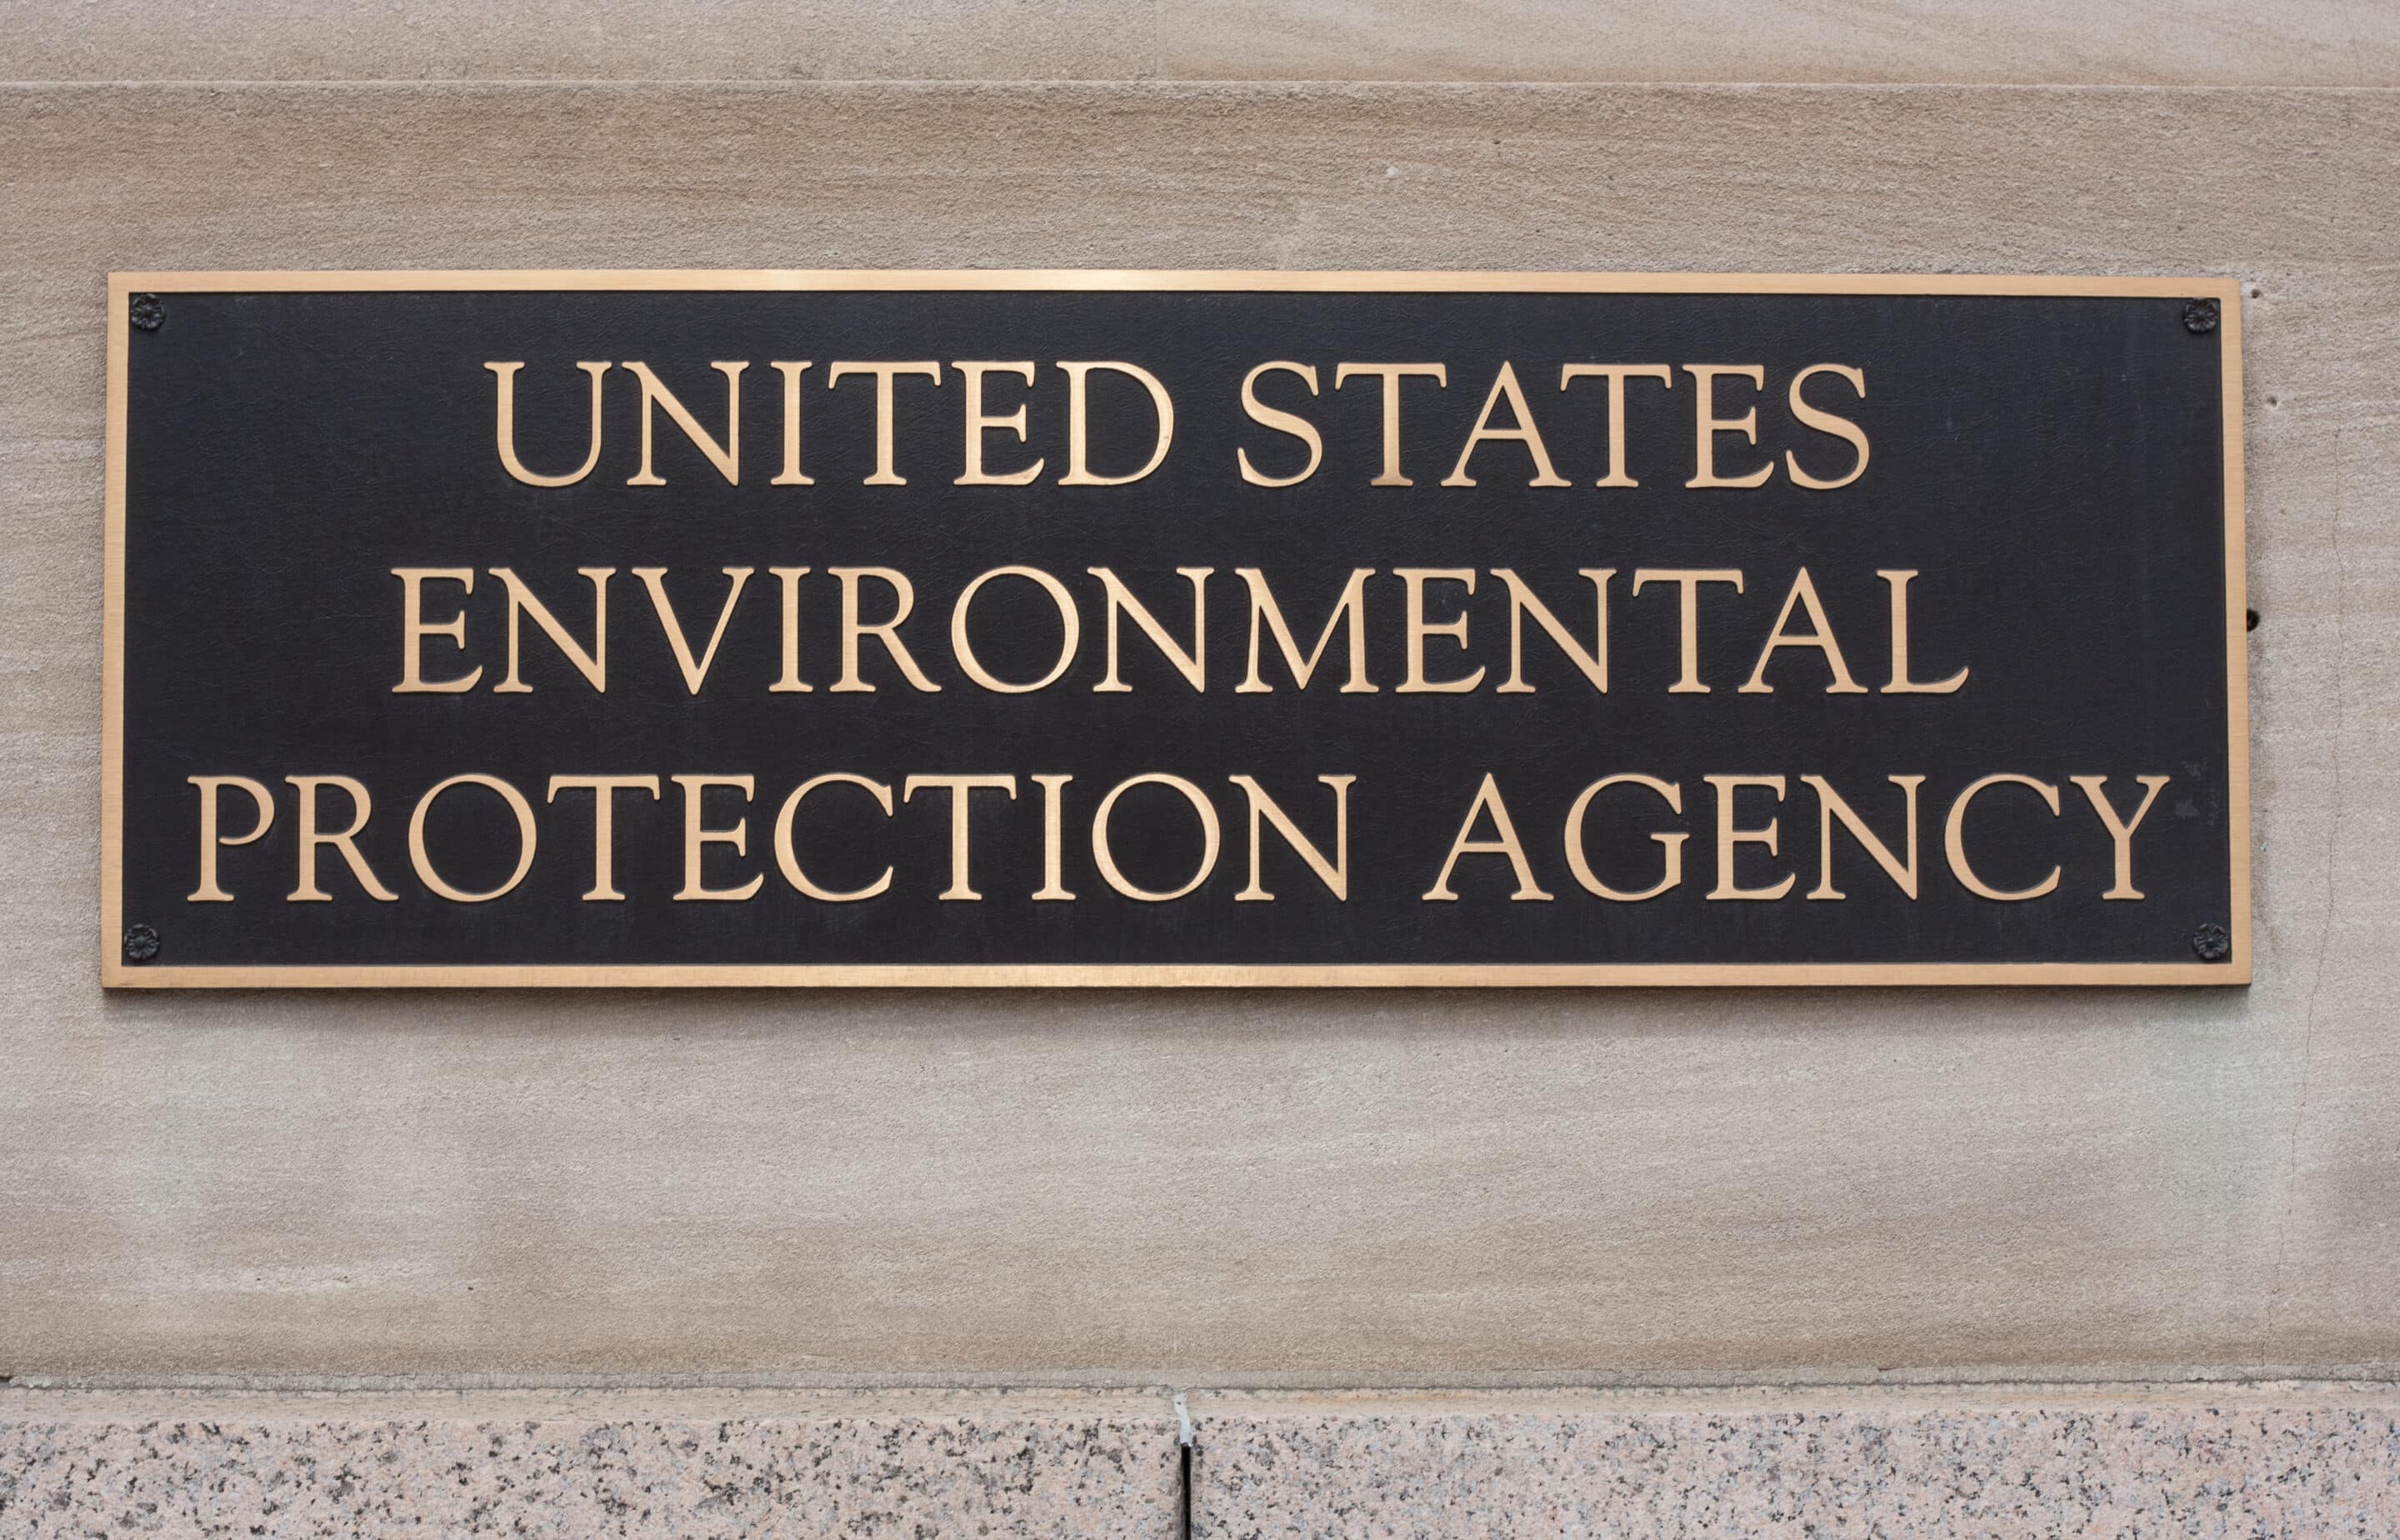 EPA CLEAN WATER ACT AND SEPTIC SYSTEM HISTORY